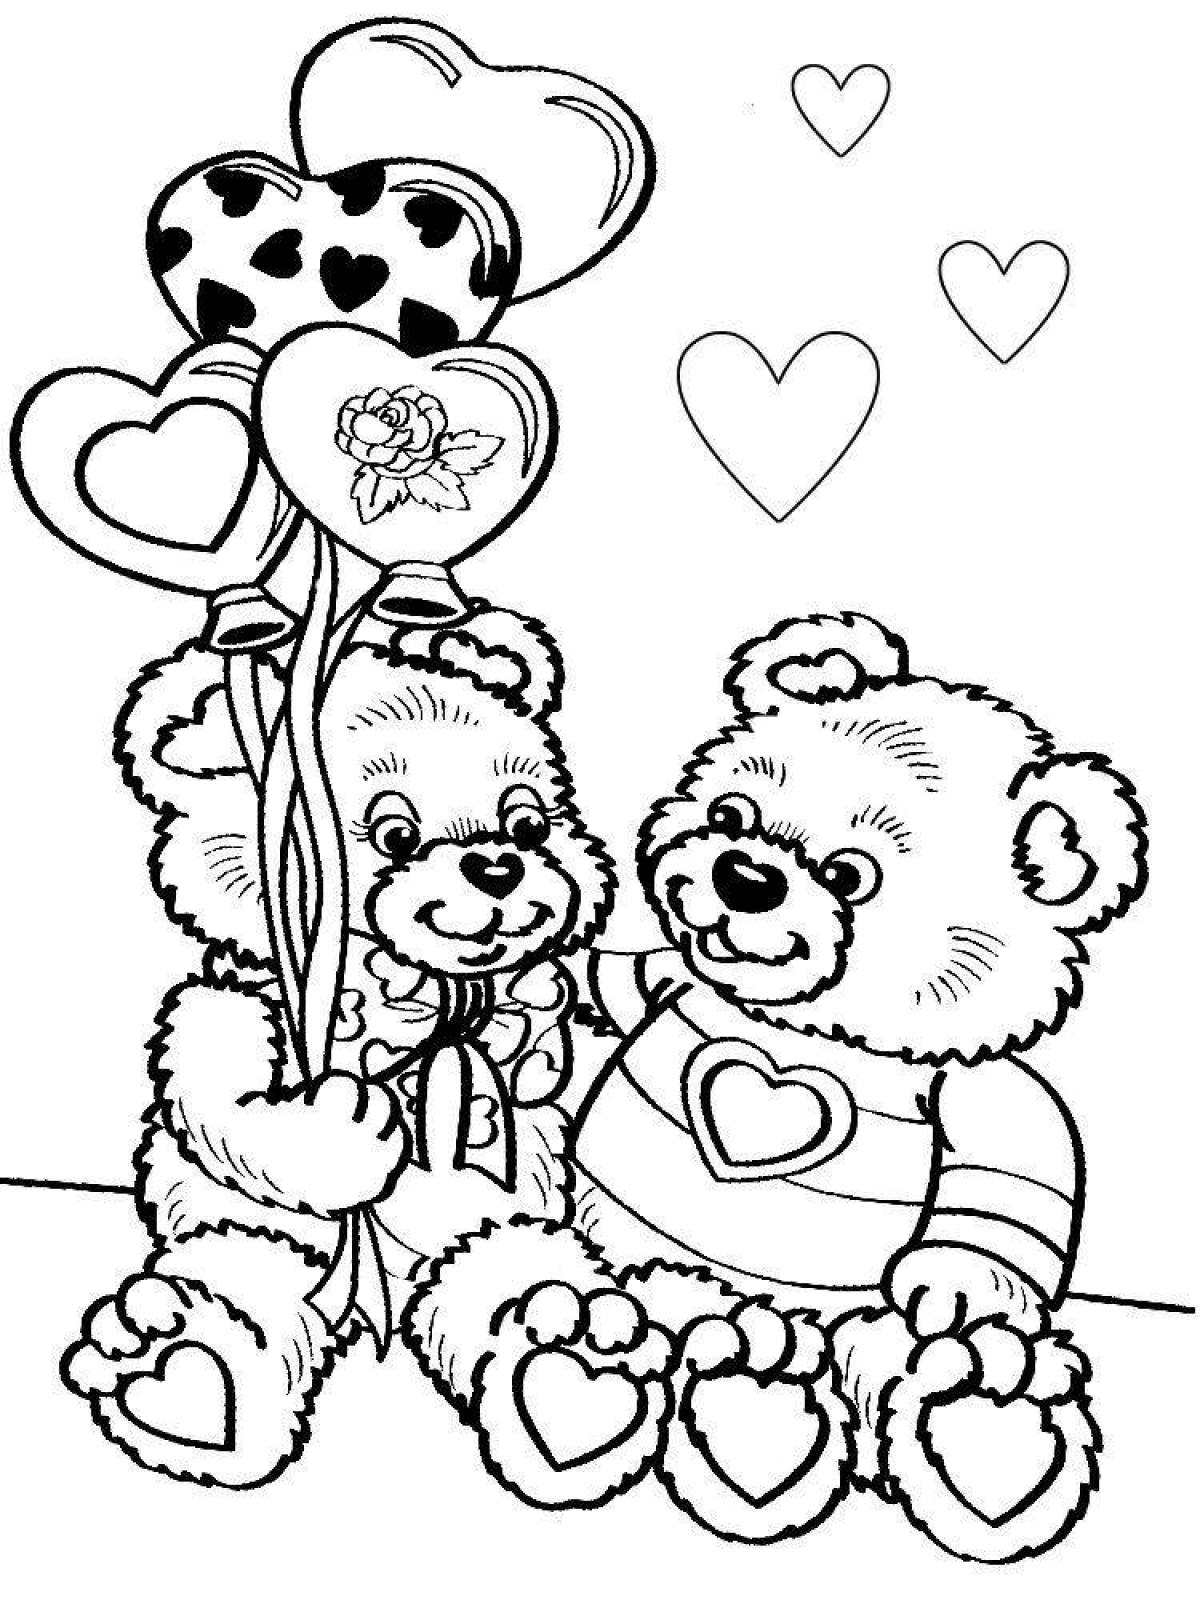 Grand coloring page black and white picture